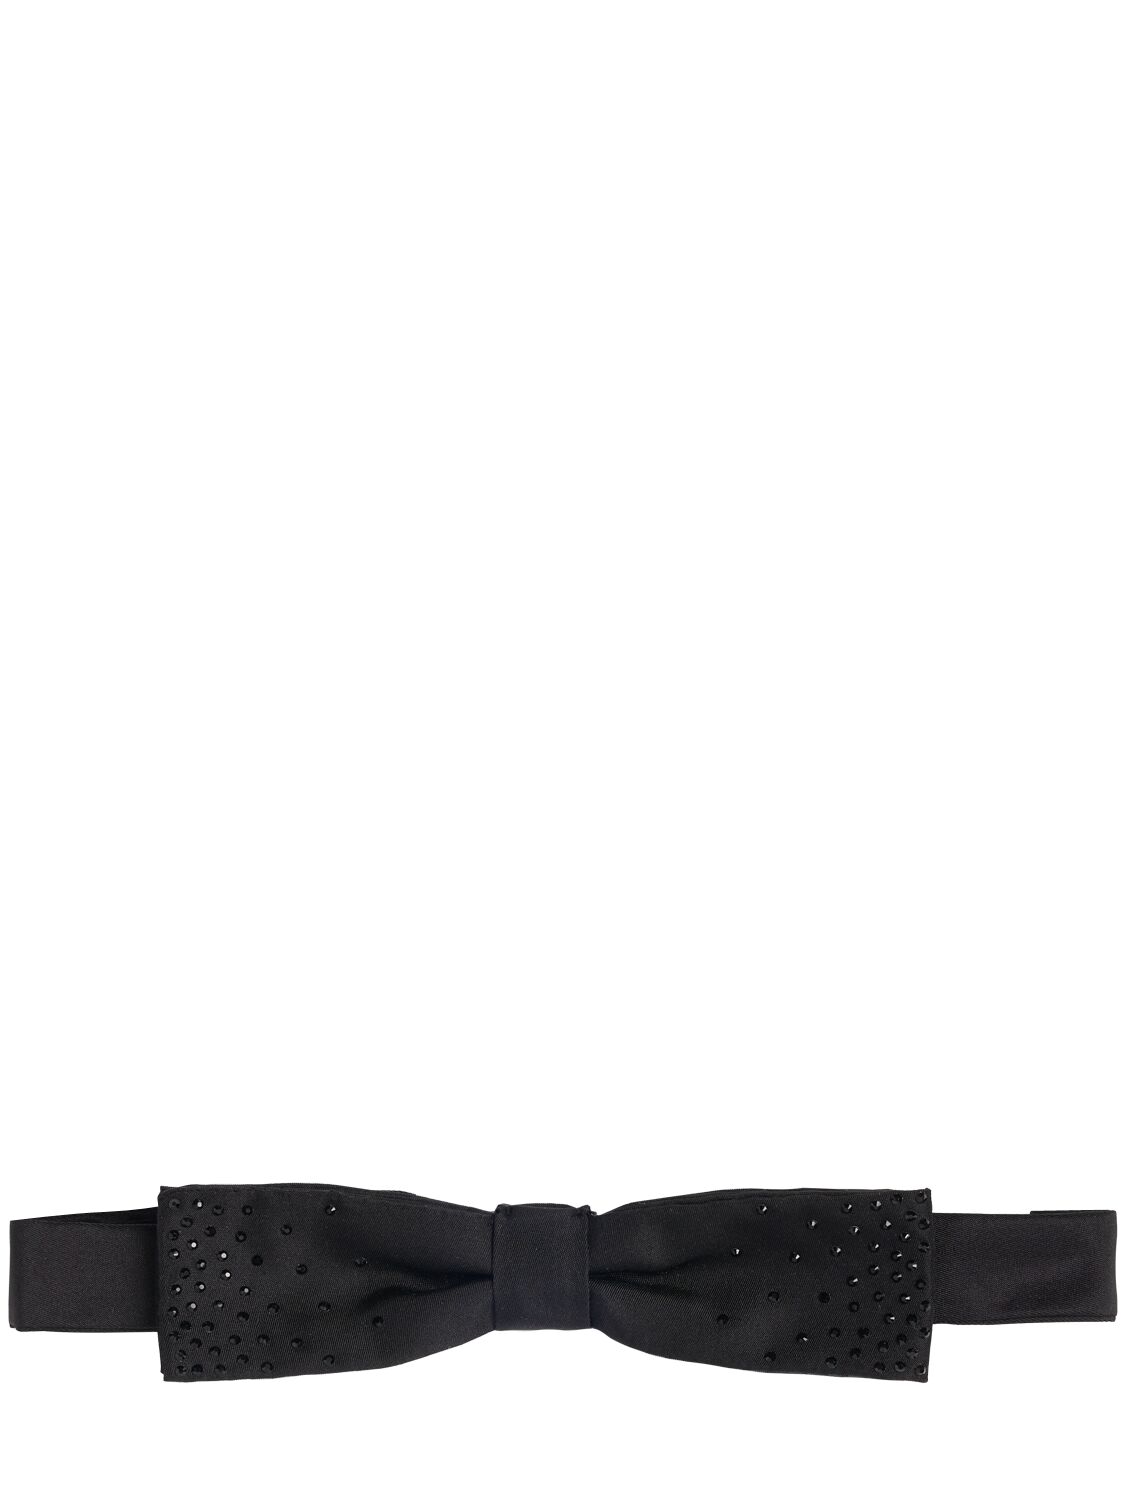 Image of Bow Tie W/ Crystals